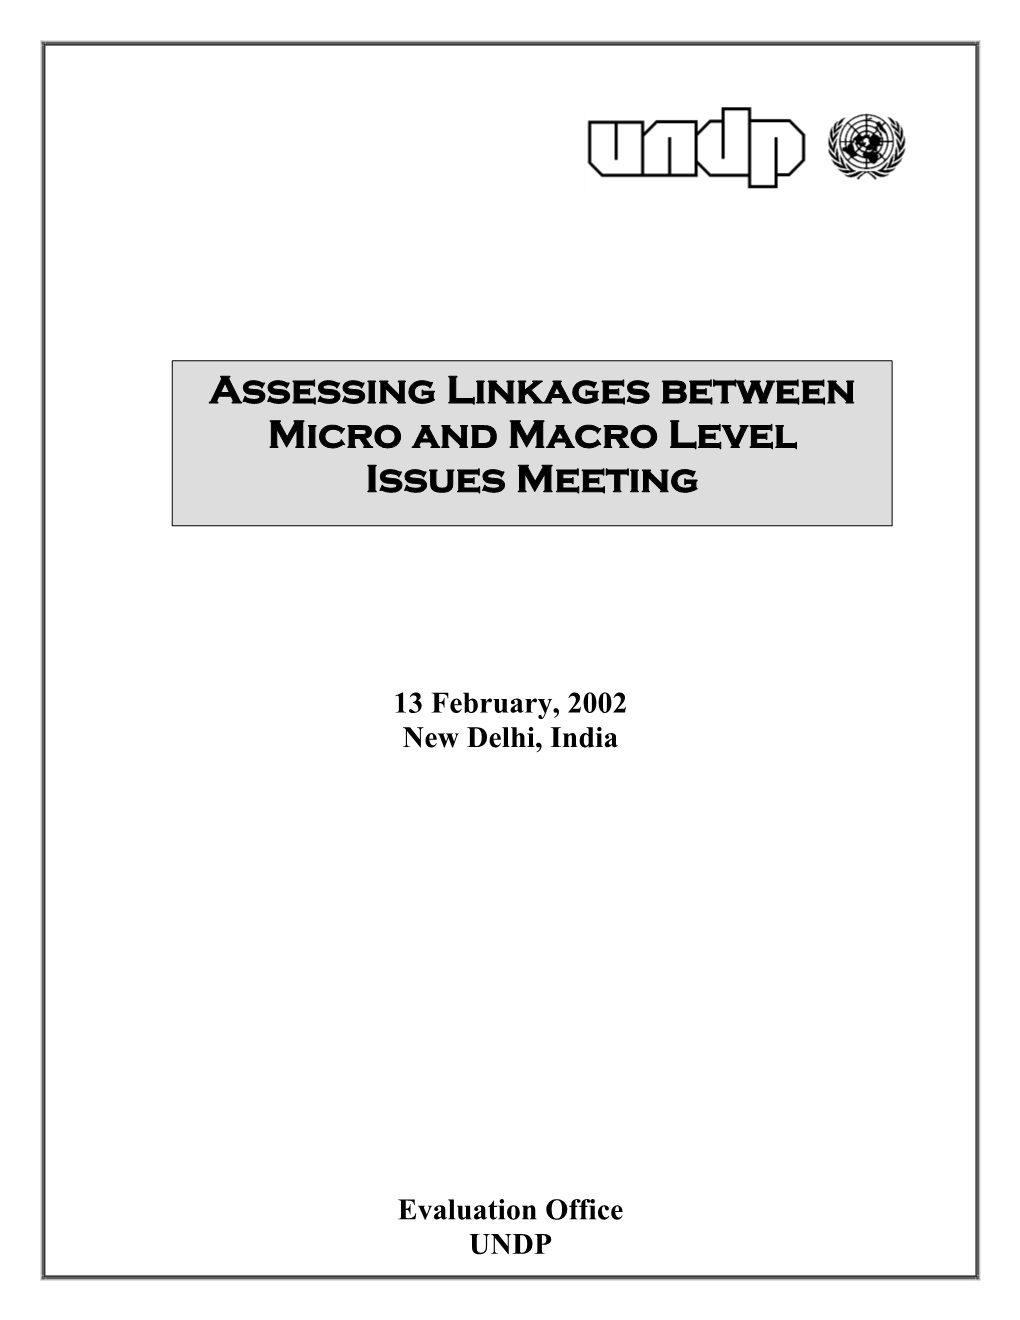 Assessing Linkages Between Micro and Macro Level Issues Meeting Agenda 13 February 2002, Ambassador Hotel, New Delhi 10:00 Am – 4:30 Pm